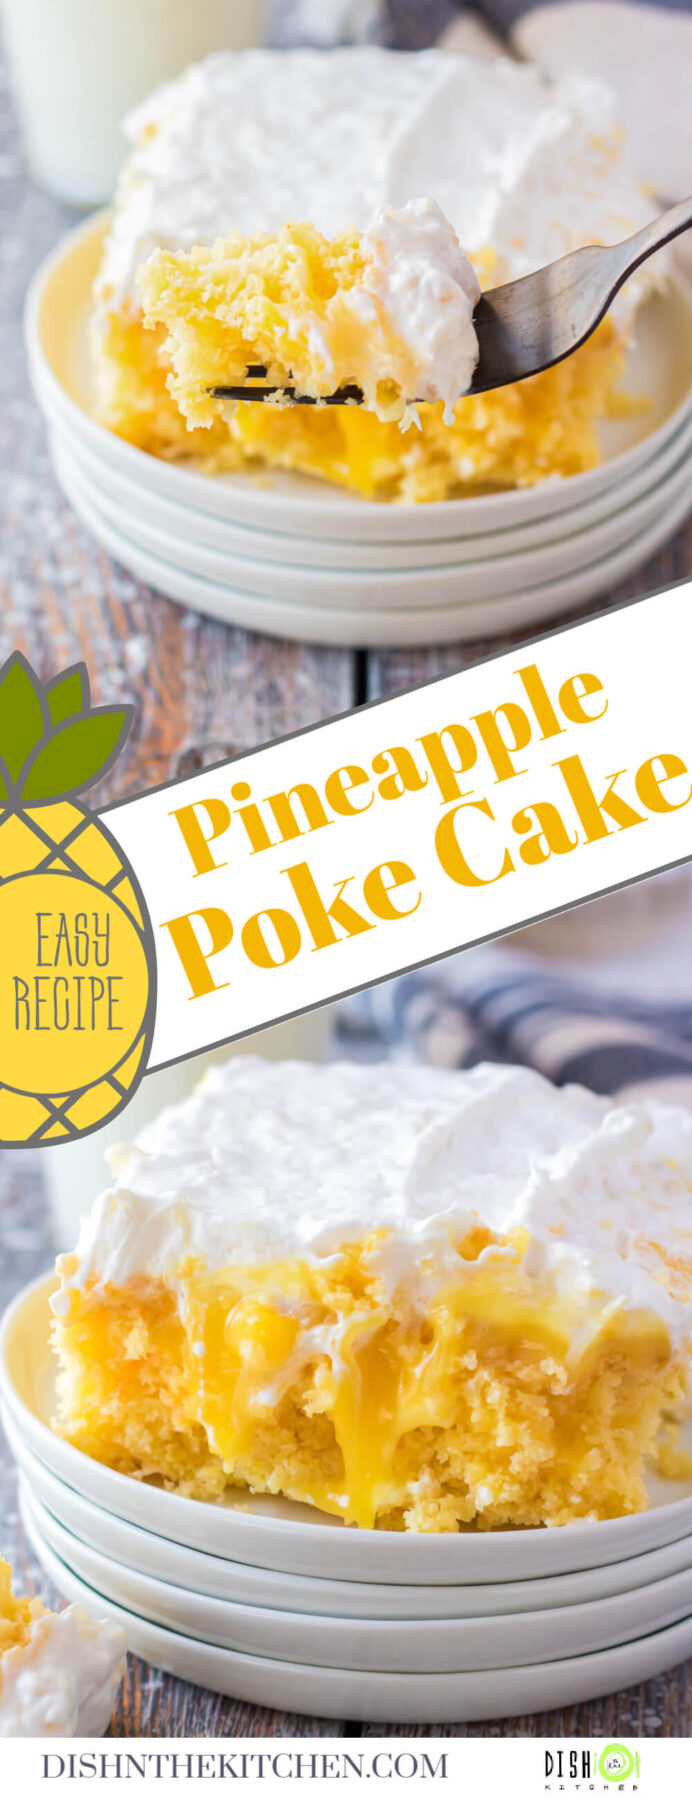 Pinterest image featuring squares of dreamy Pineapple Poke Cake with creamy whipped topping on a stack of white plates.